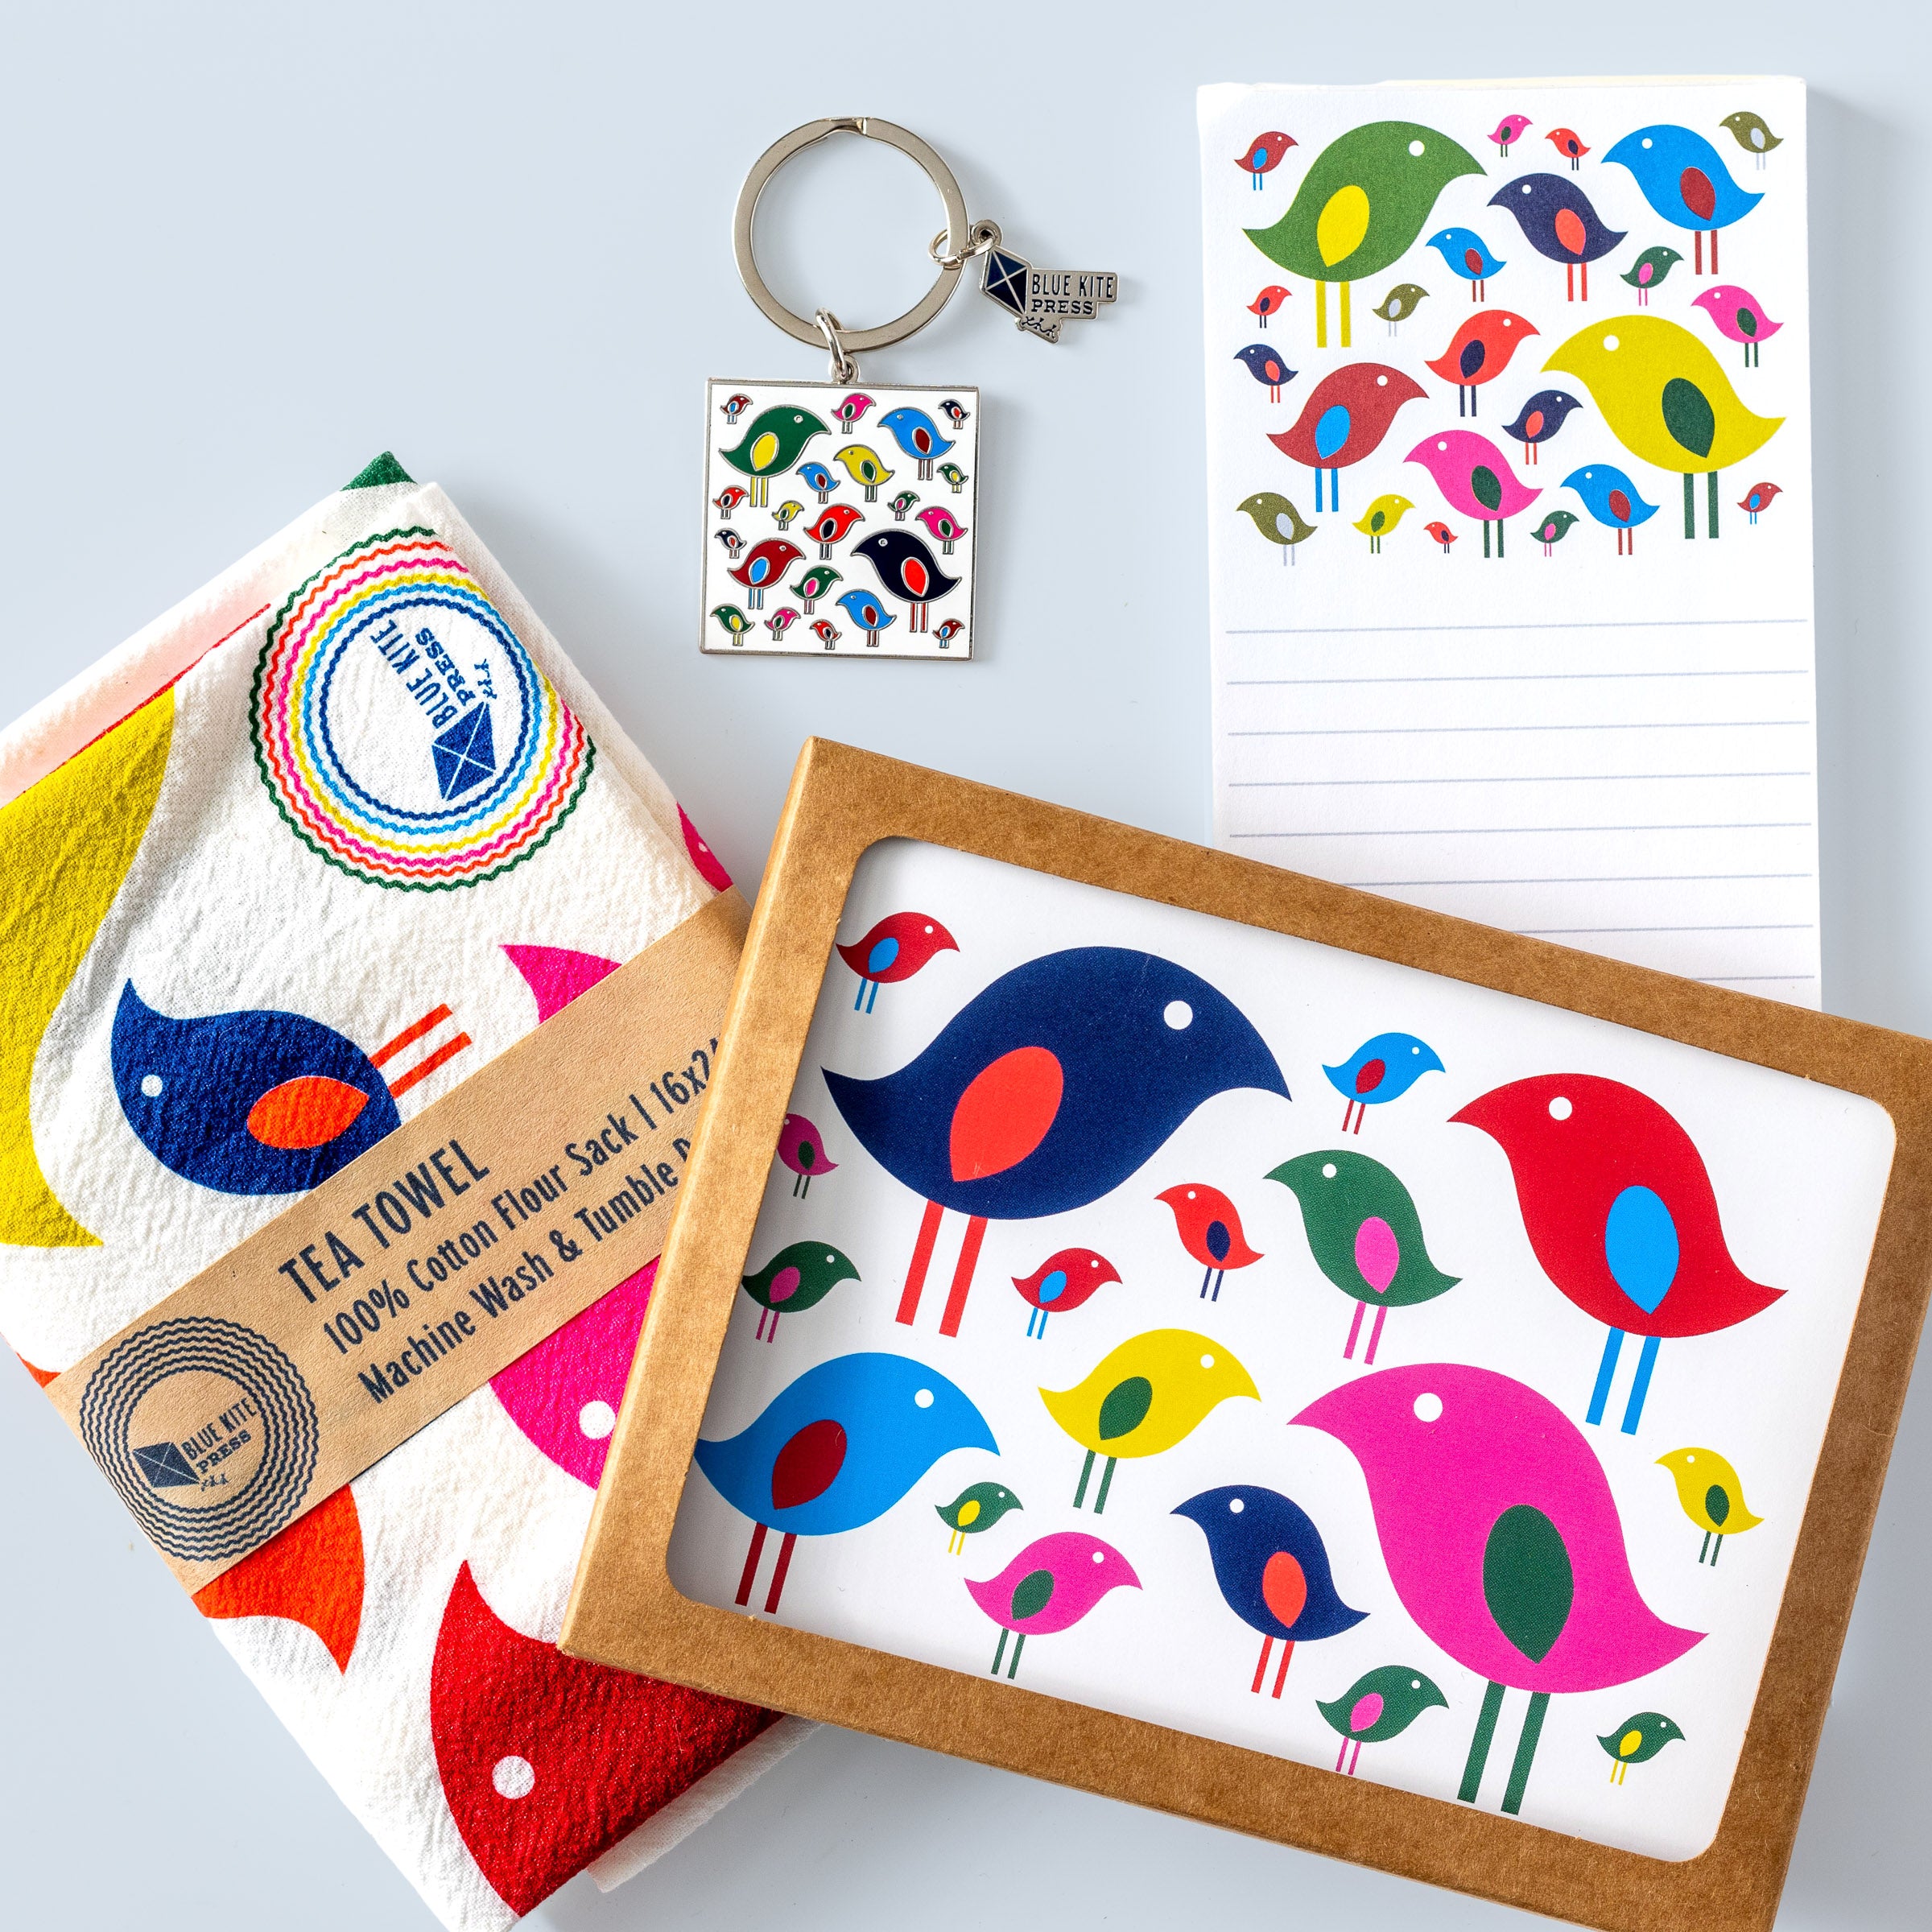 Blue Kite Press  One of a Kind Housewares, Stationery, and Gifts